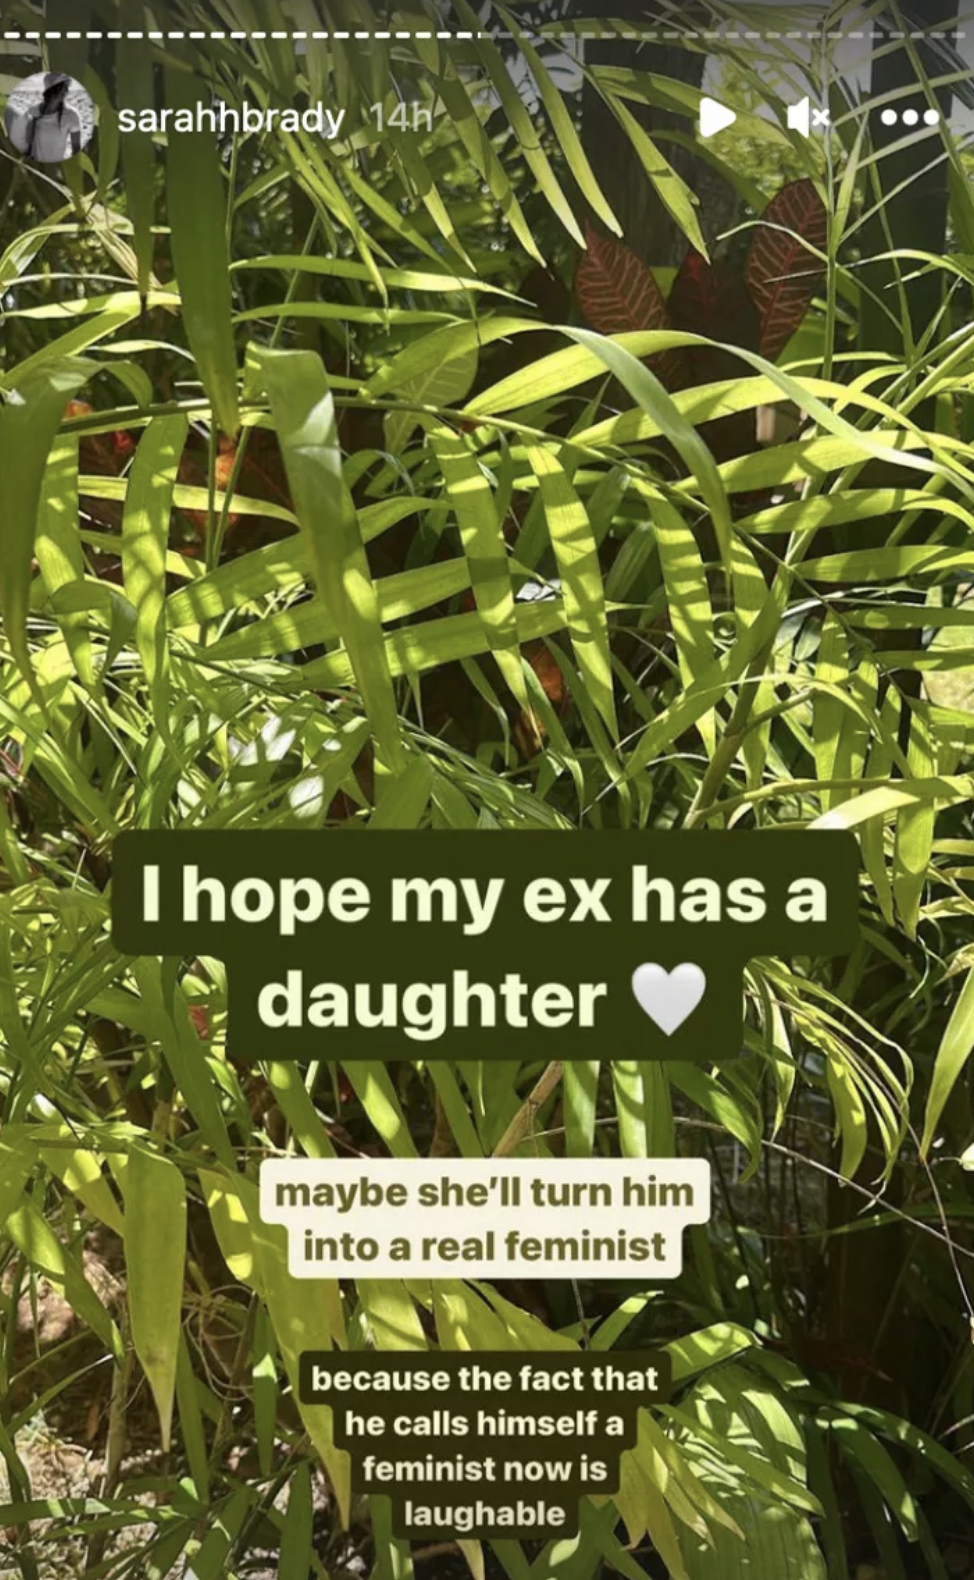 Surfer Sarah Brady (Jonah Hill's ex) posts series of Instagram stories  calling out a narcissistic, emotionally abusive celebrity ex-boyfriend :  r/Fauxmoi